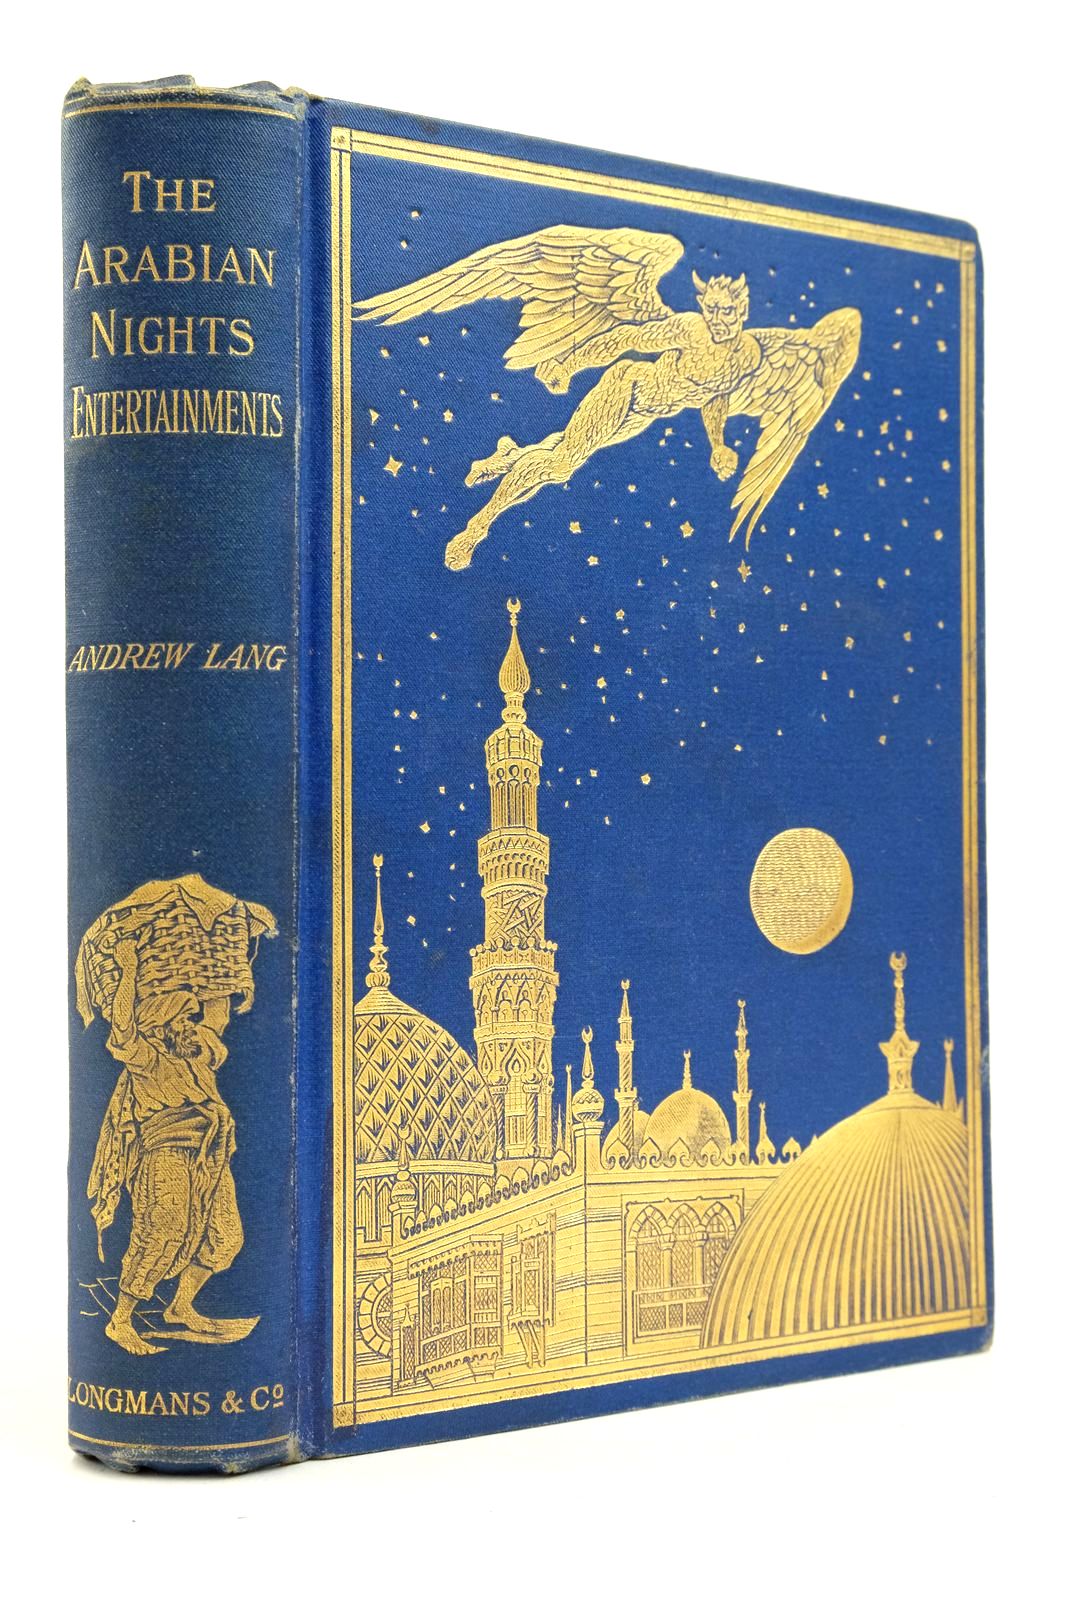 Photo of THE ARABIAN NIGHTS ENTERTAINMENTS written by Lang, Andrew illustrated by Ford, H.J. published by Longmans, Green & Co. (STOCK CODE: 2139759)  for sale by Stella & Rose's Books